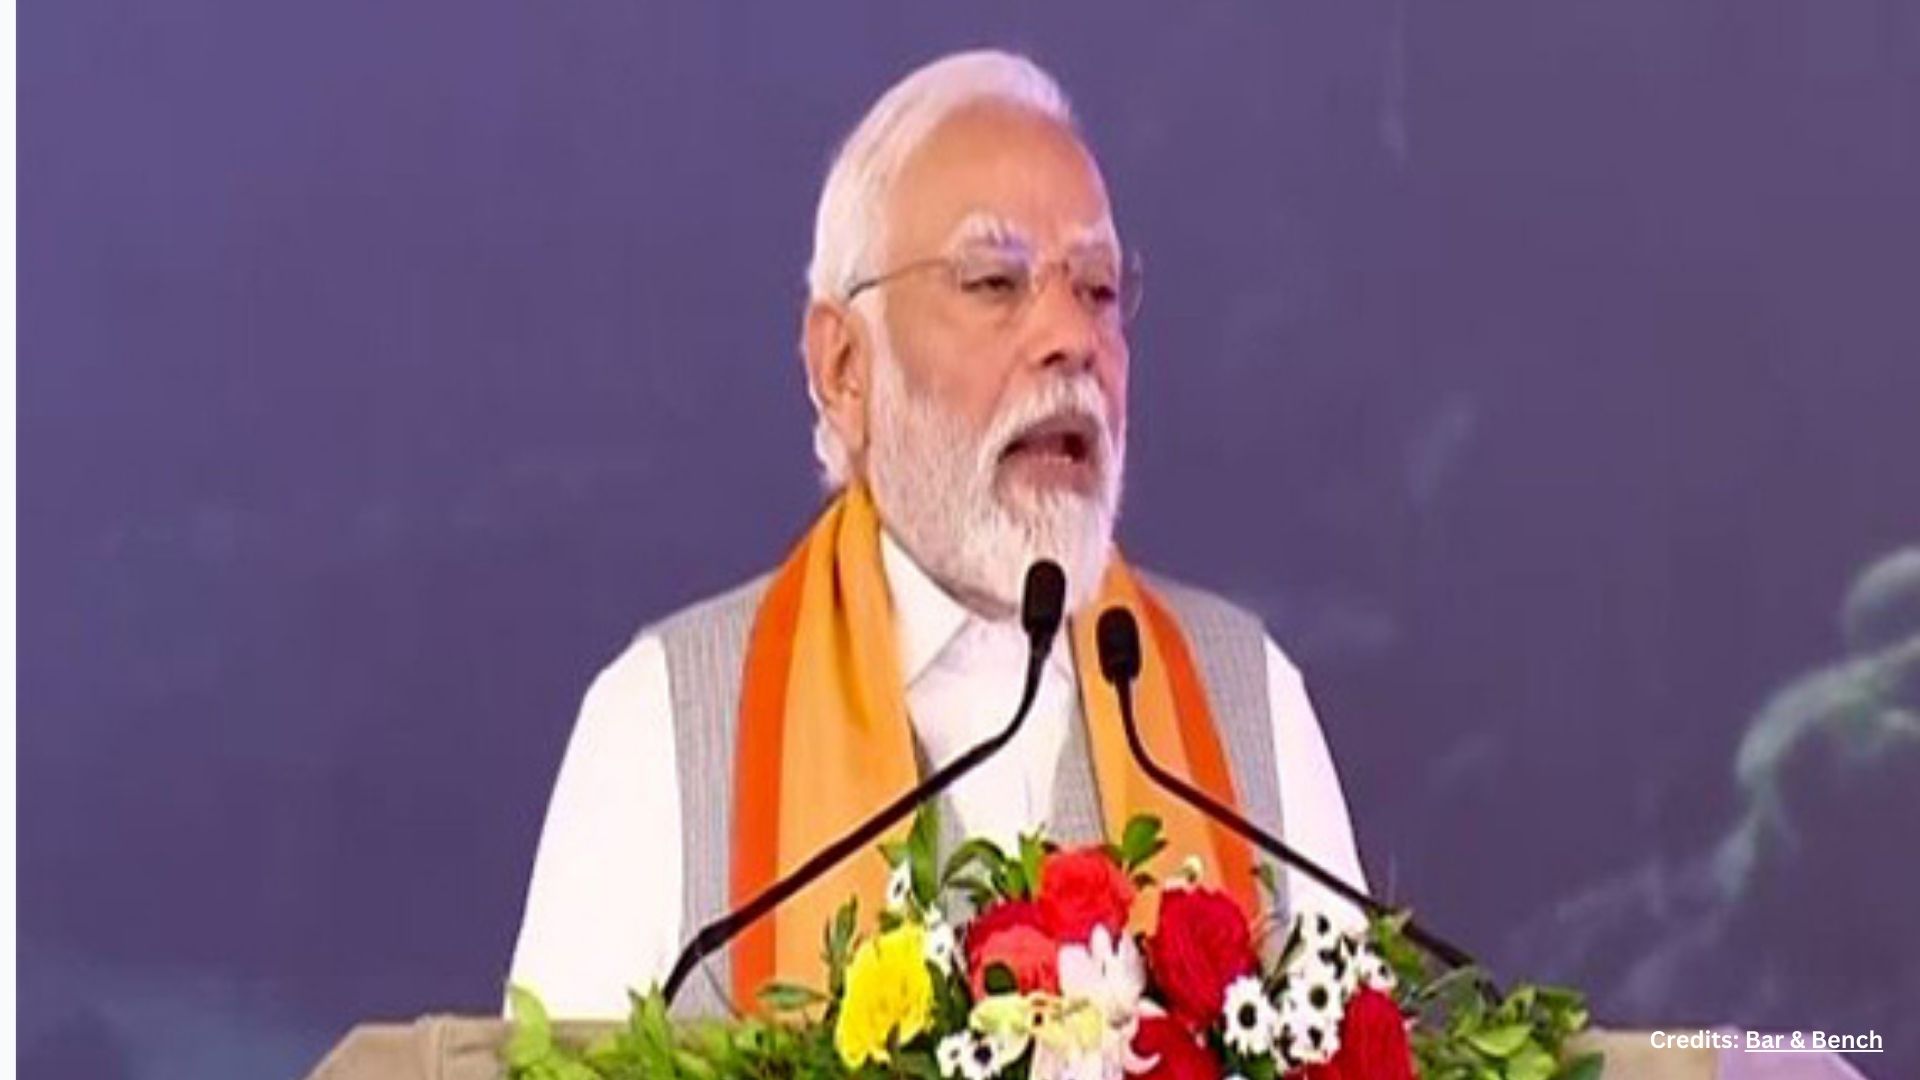 “Area of Lakshadweep may be small, but its heart is huge” says PM Modi at Kavaratti